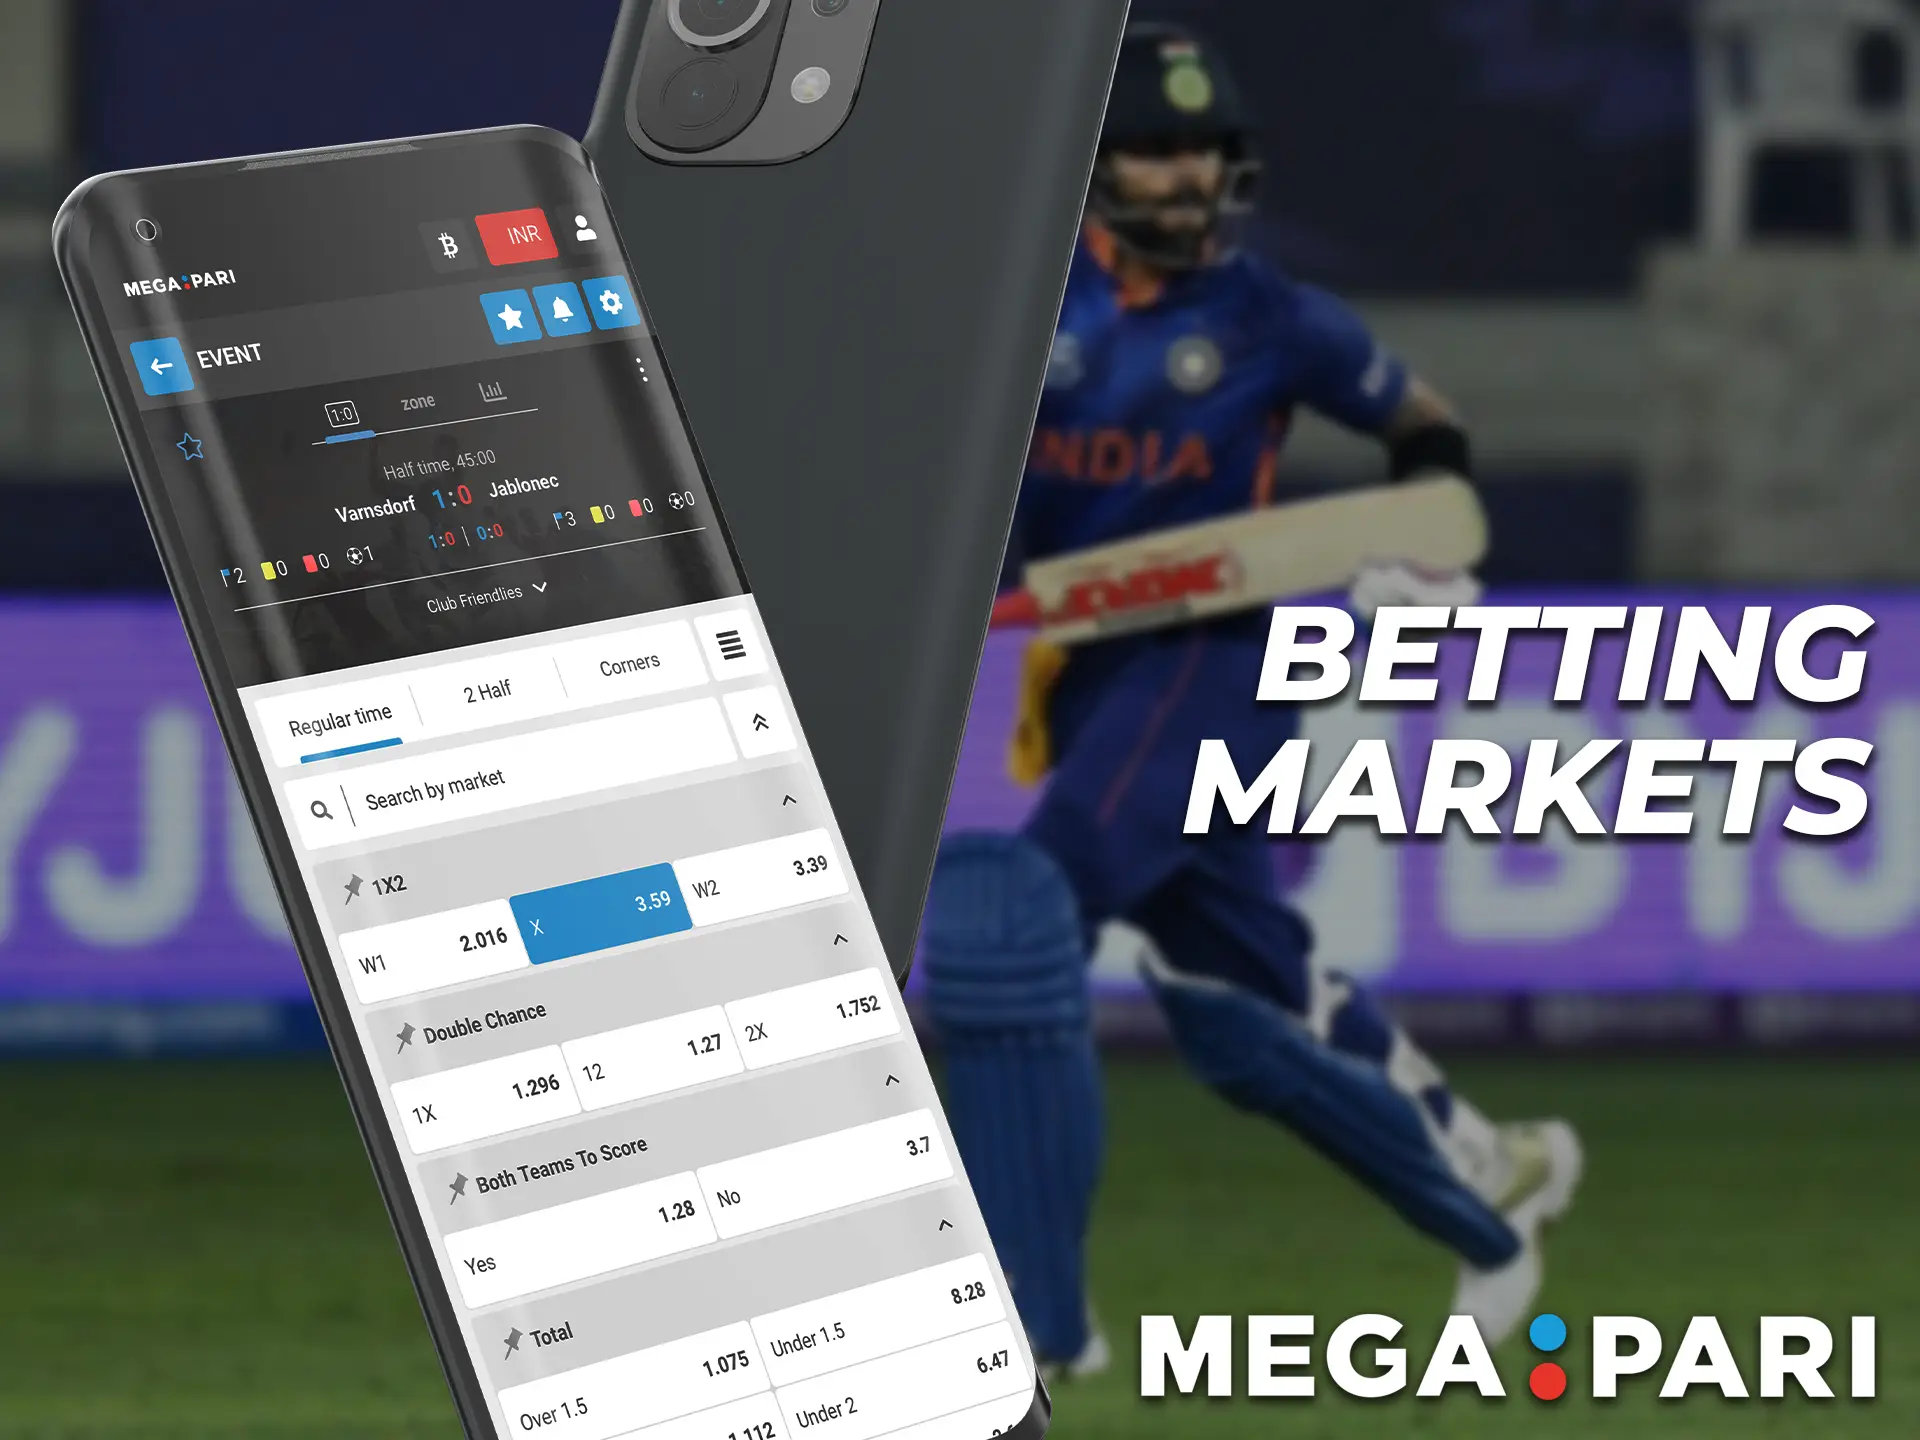 Check out Megapari's overview of the betting markets.